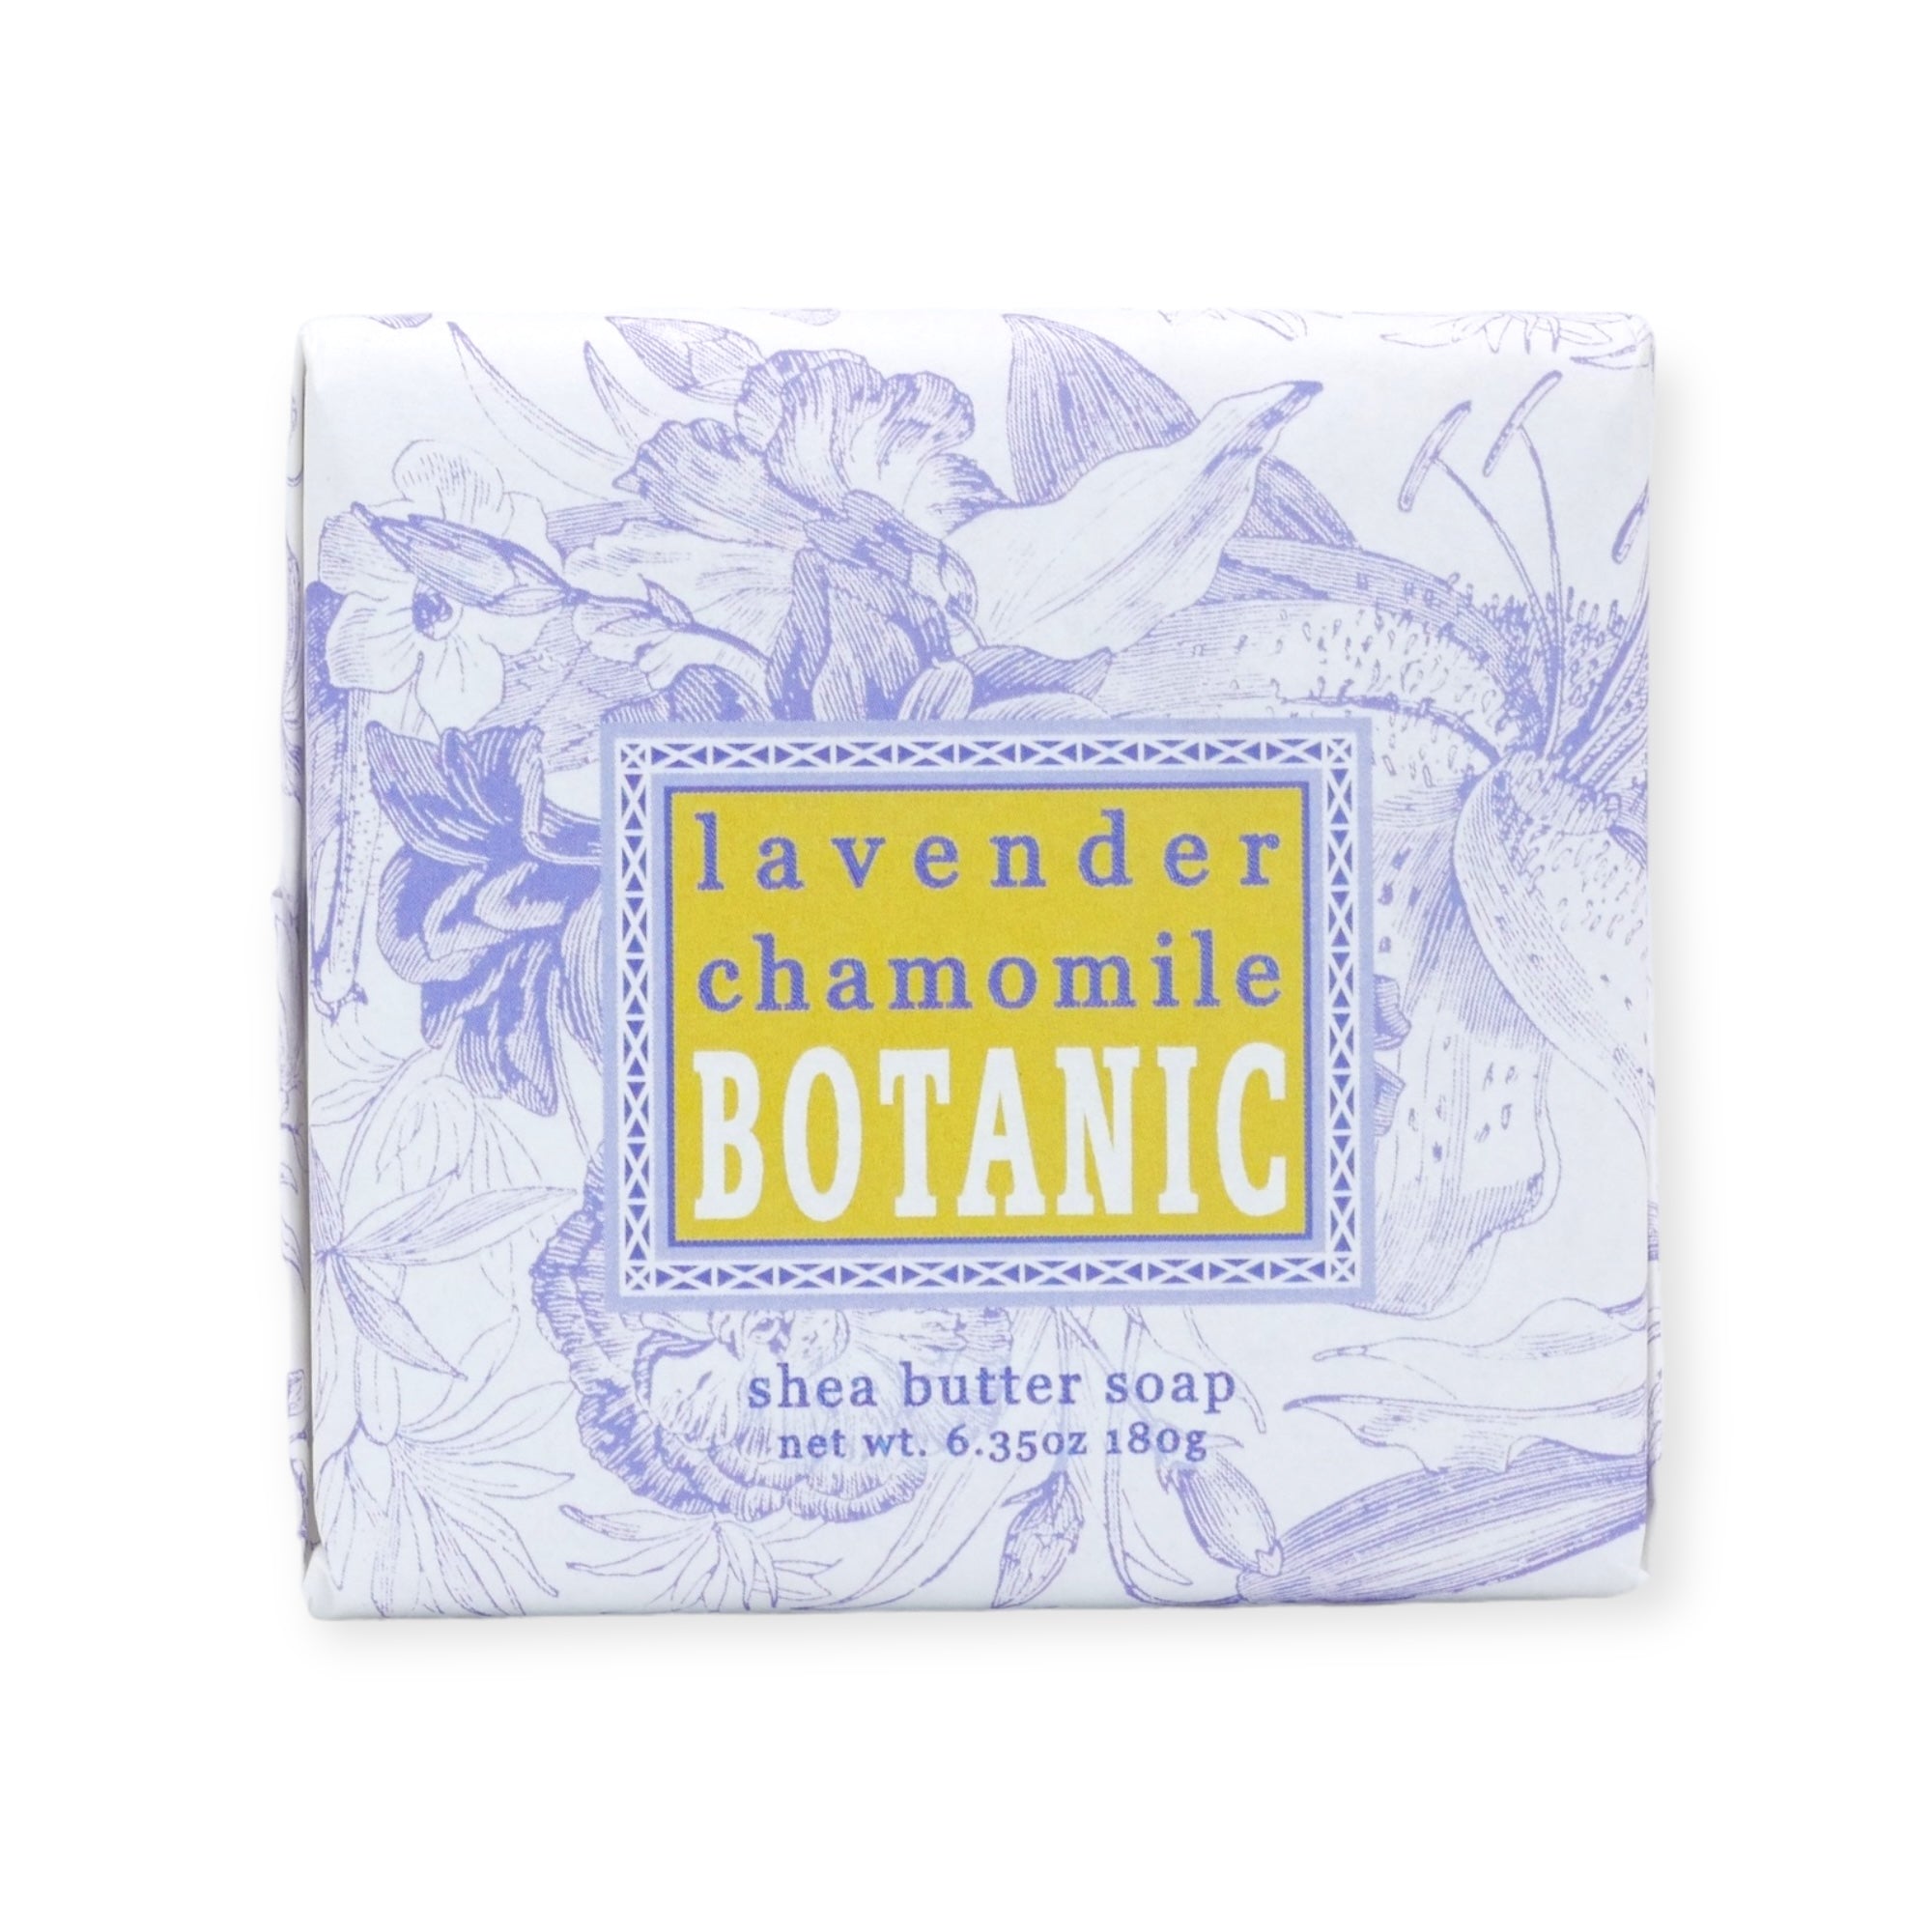 Lavender Chamomile Shea Butter Spa Soap by Greenwich Bay Trading Co.